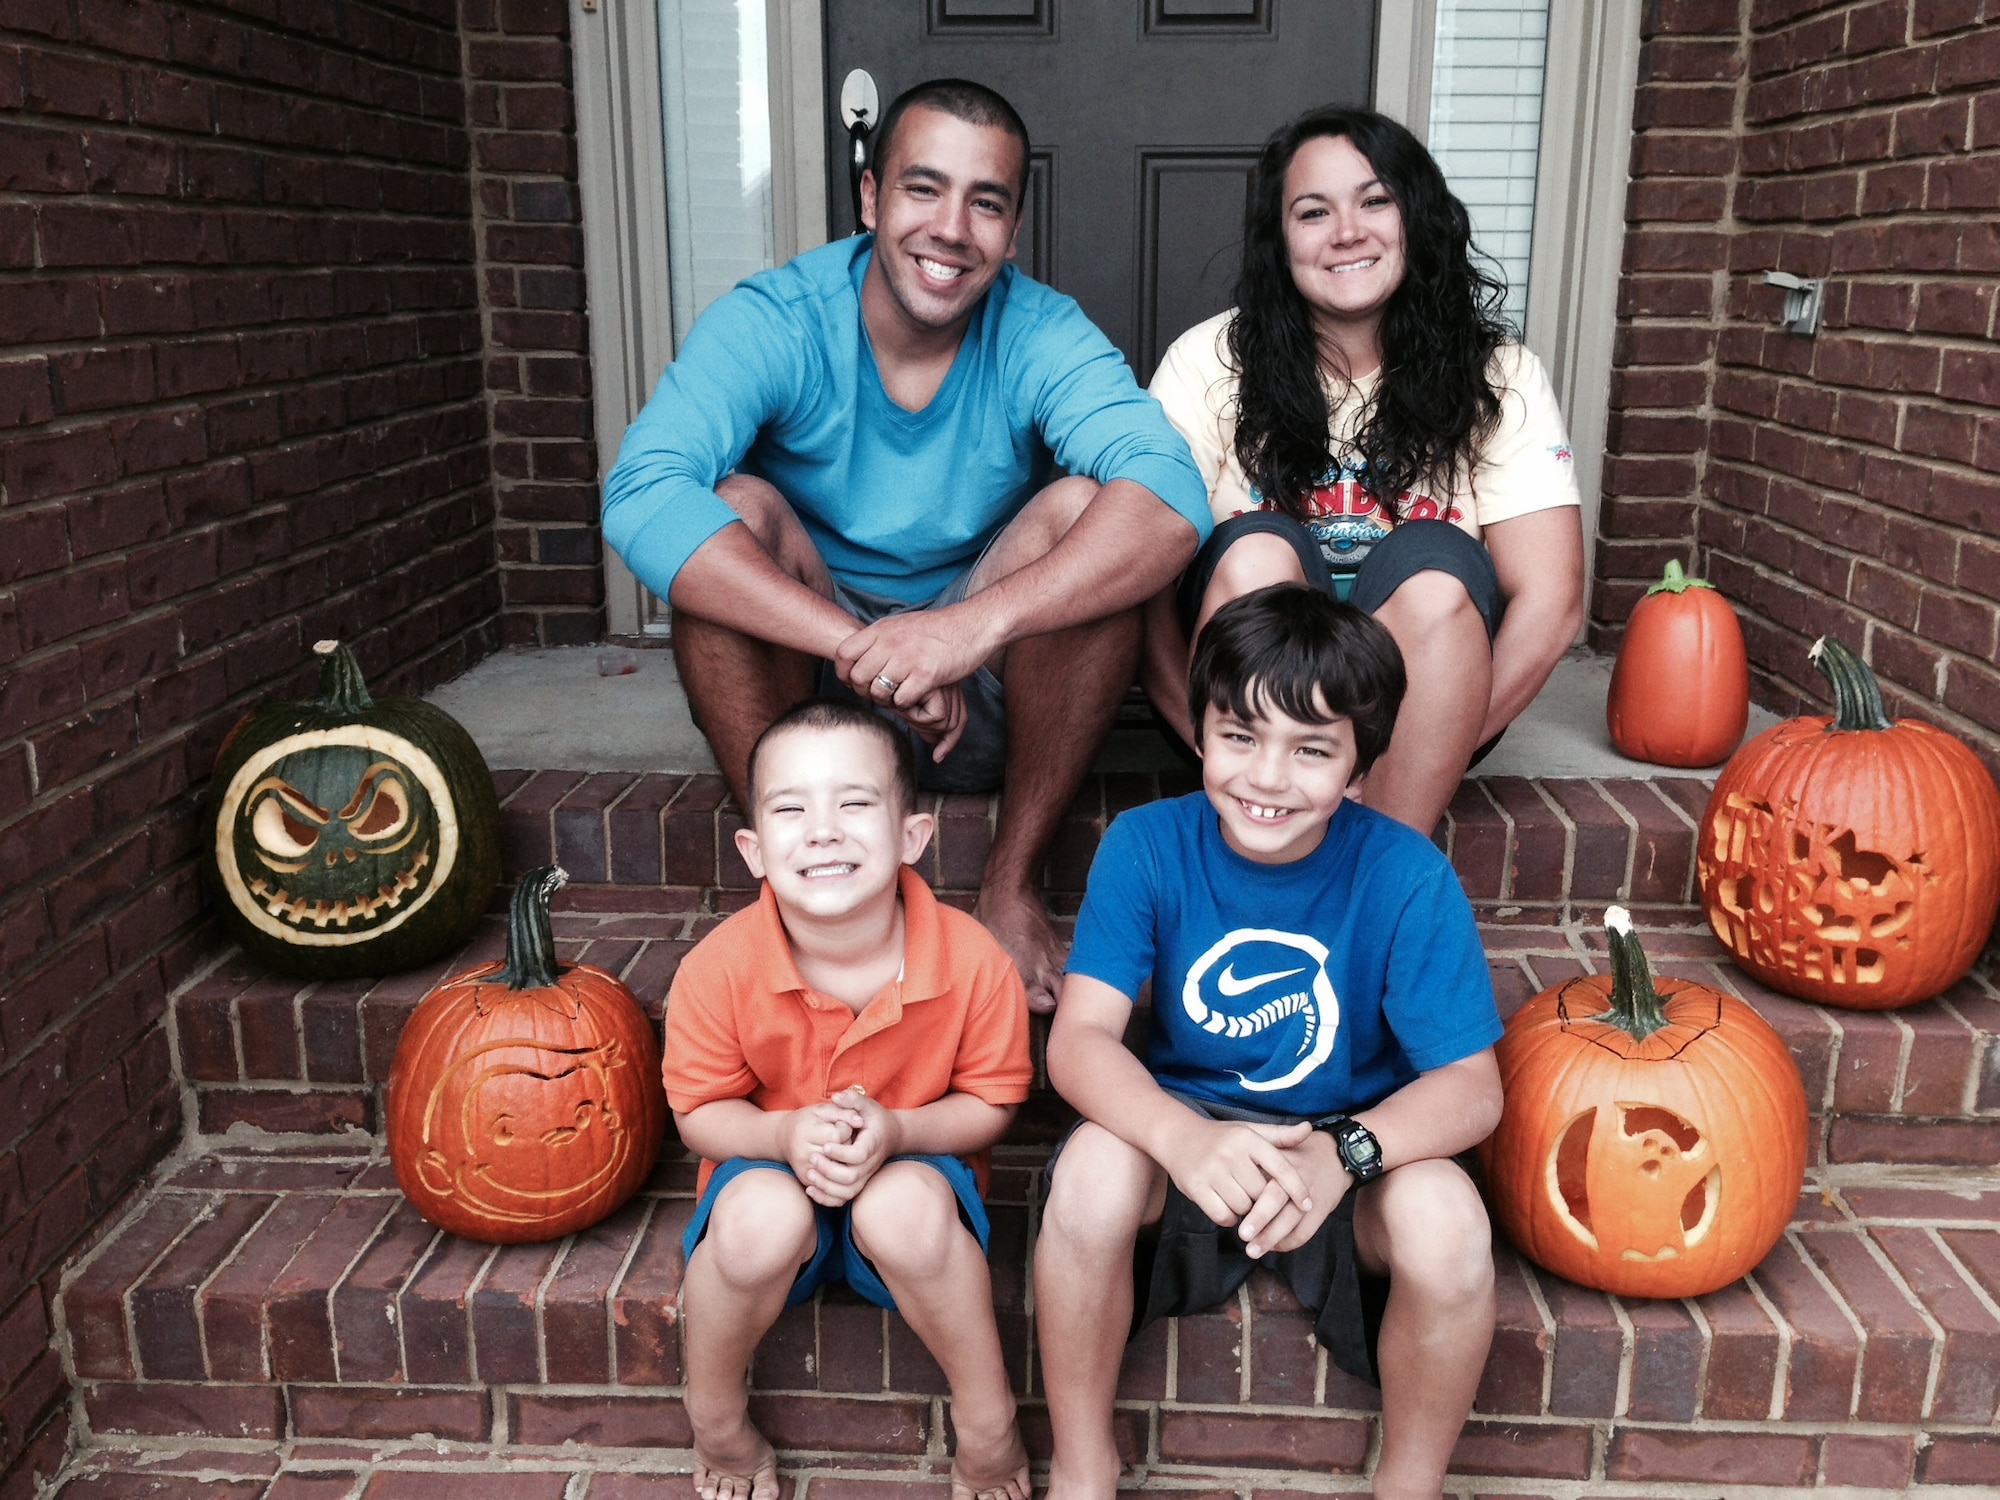 Staff Sgt. Rey Edenfield poses with his wife, Amy, and their two sons, Grayson,left, and Dawson on the front porch of their home Oct. 27, 2013. The picture was taken the day before Edenfield was involved in a motorcycle accident that resulted in his left leg being amputated six inches below the knee. Edenfield is an air traffic controller at Maxwell Air Force Base, Ala. (Courtesy photo) 